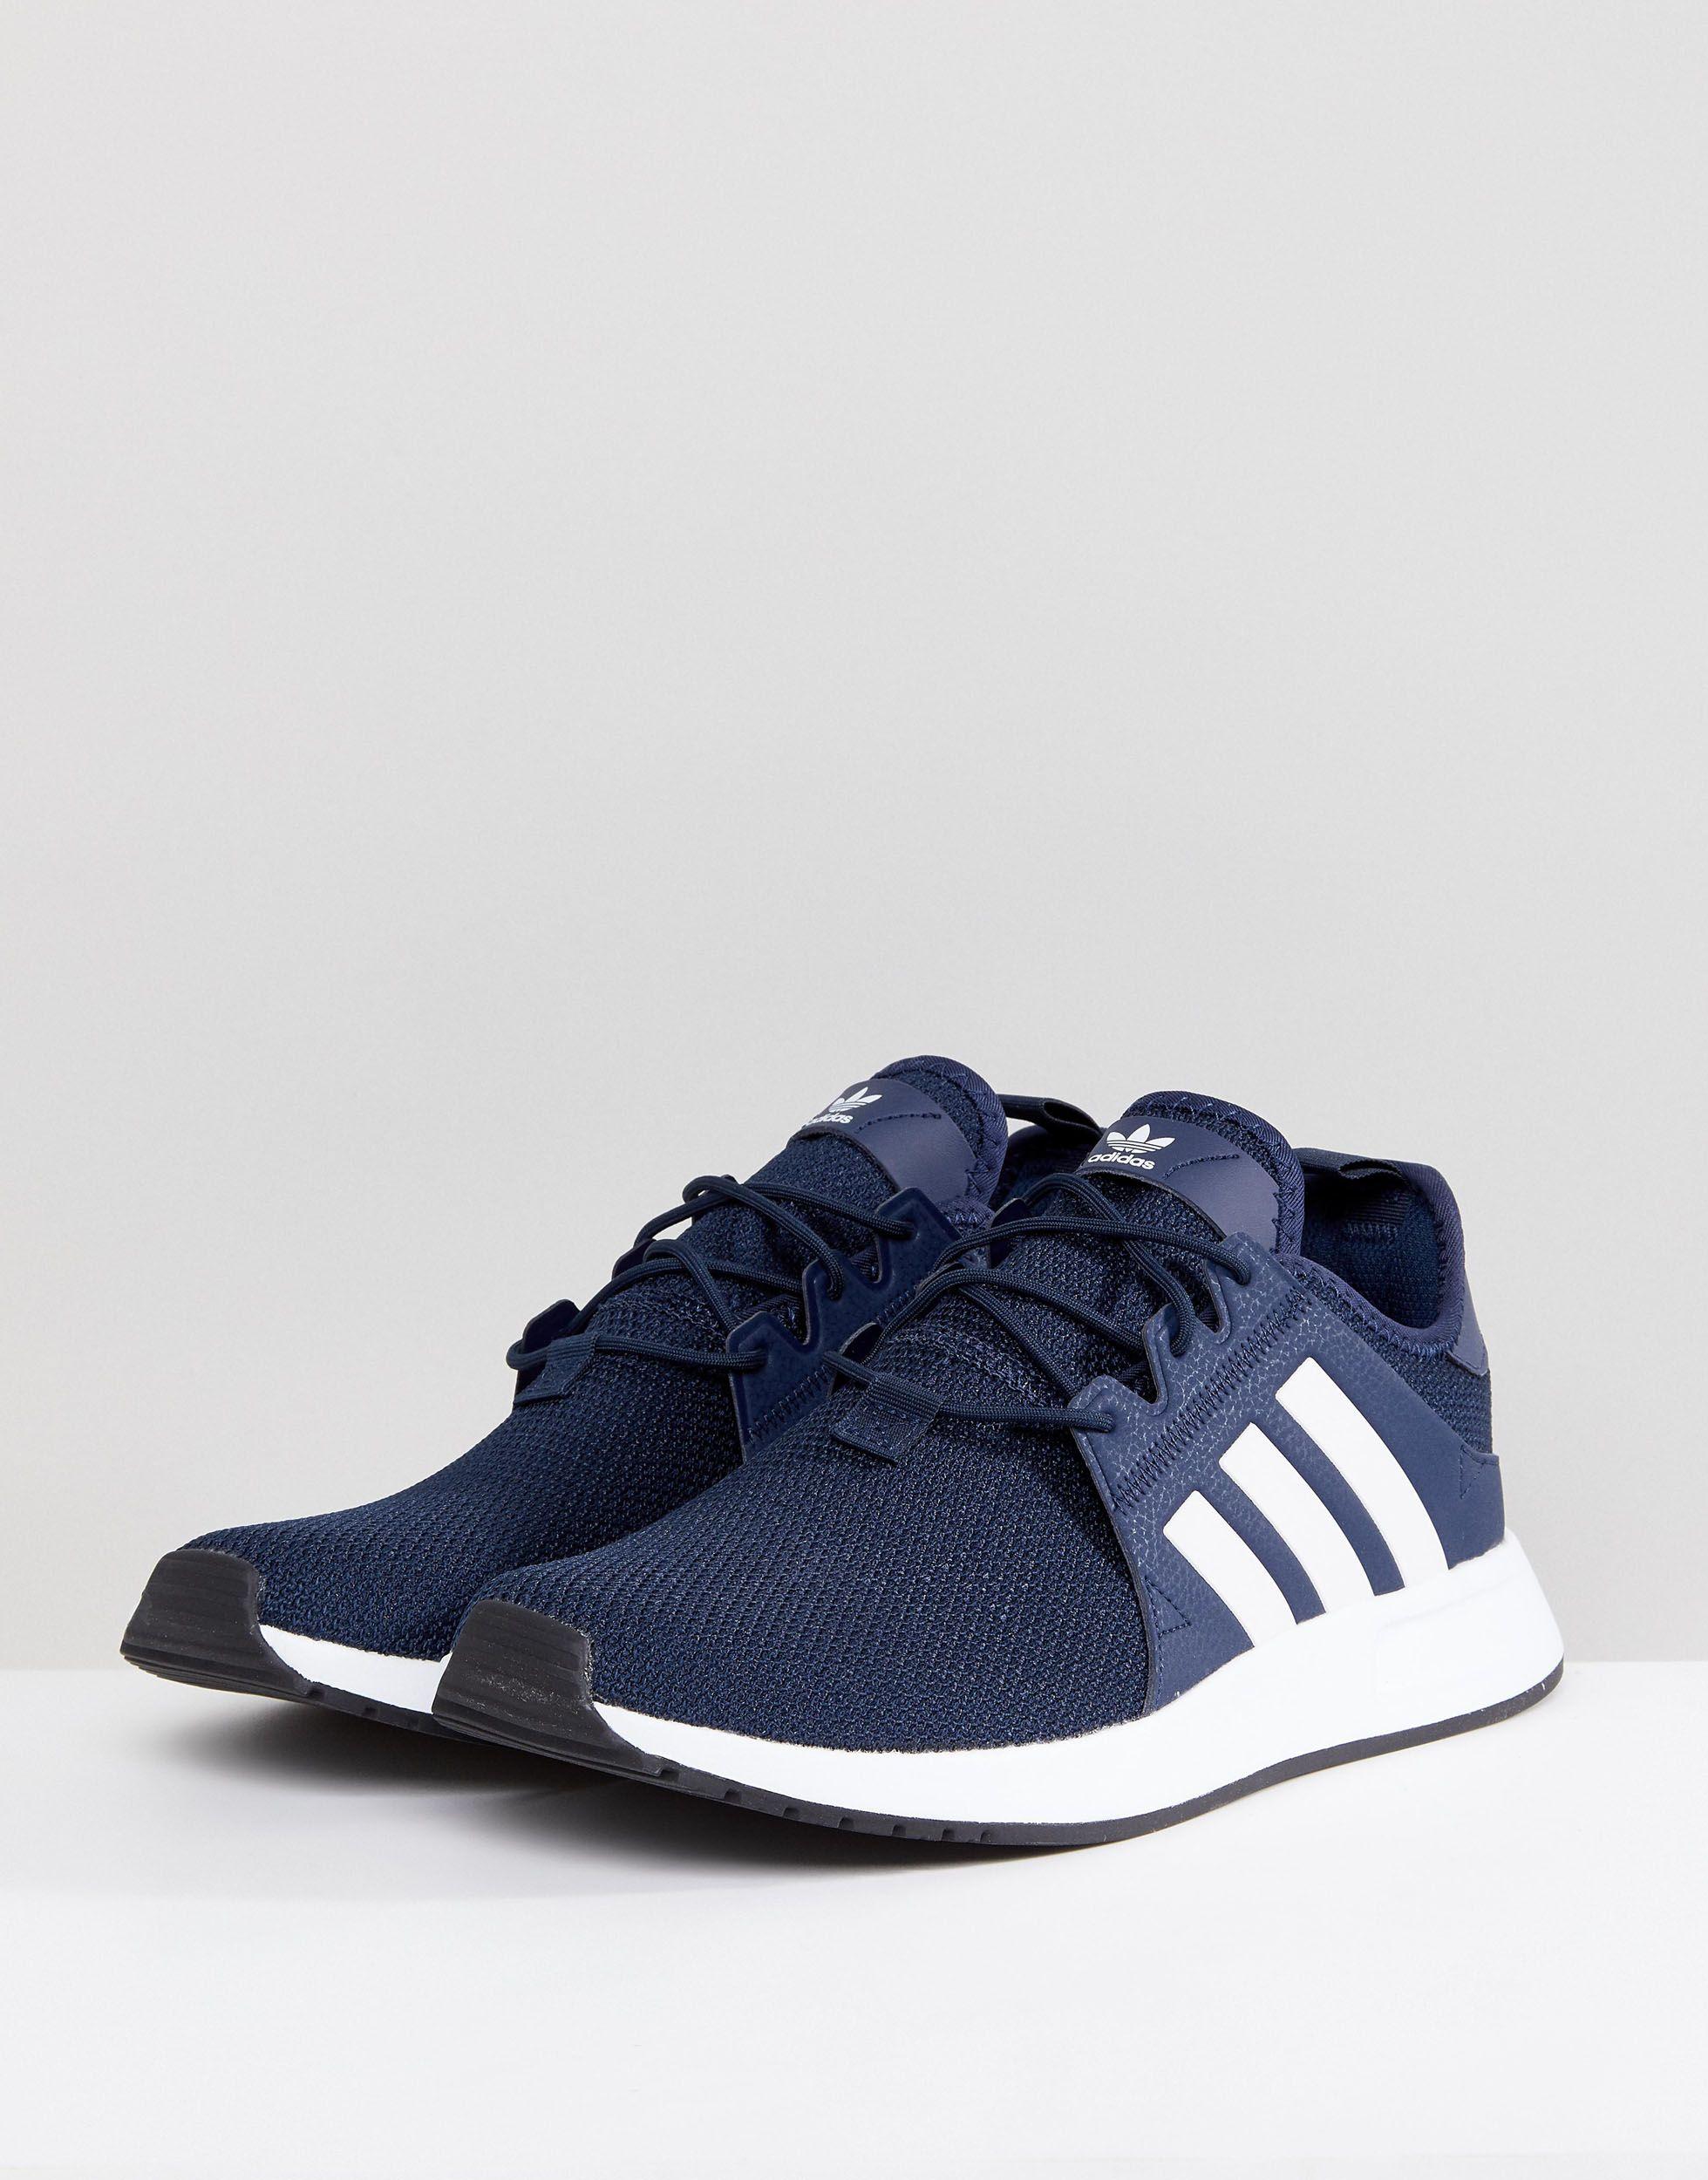 adidas X Plr Trainers in Blue for Men